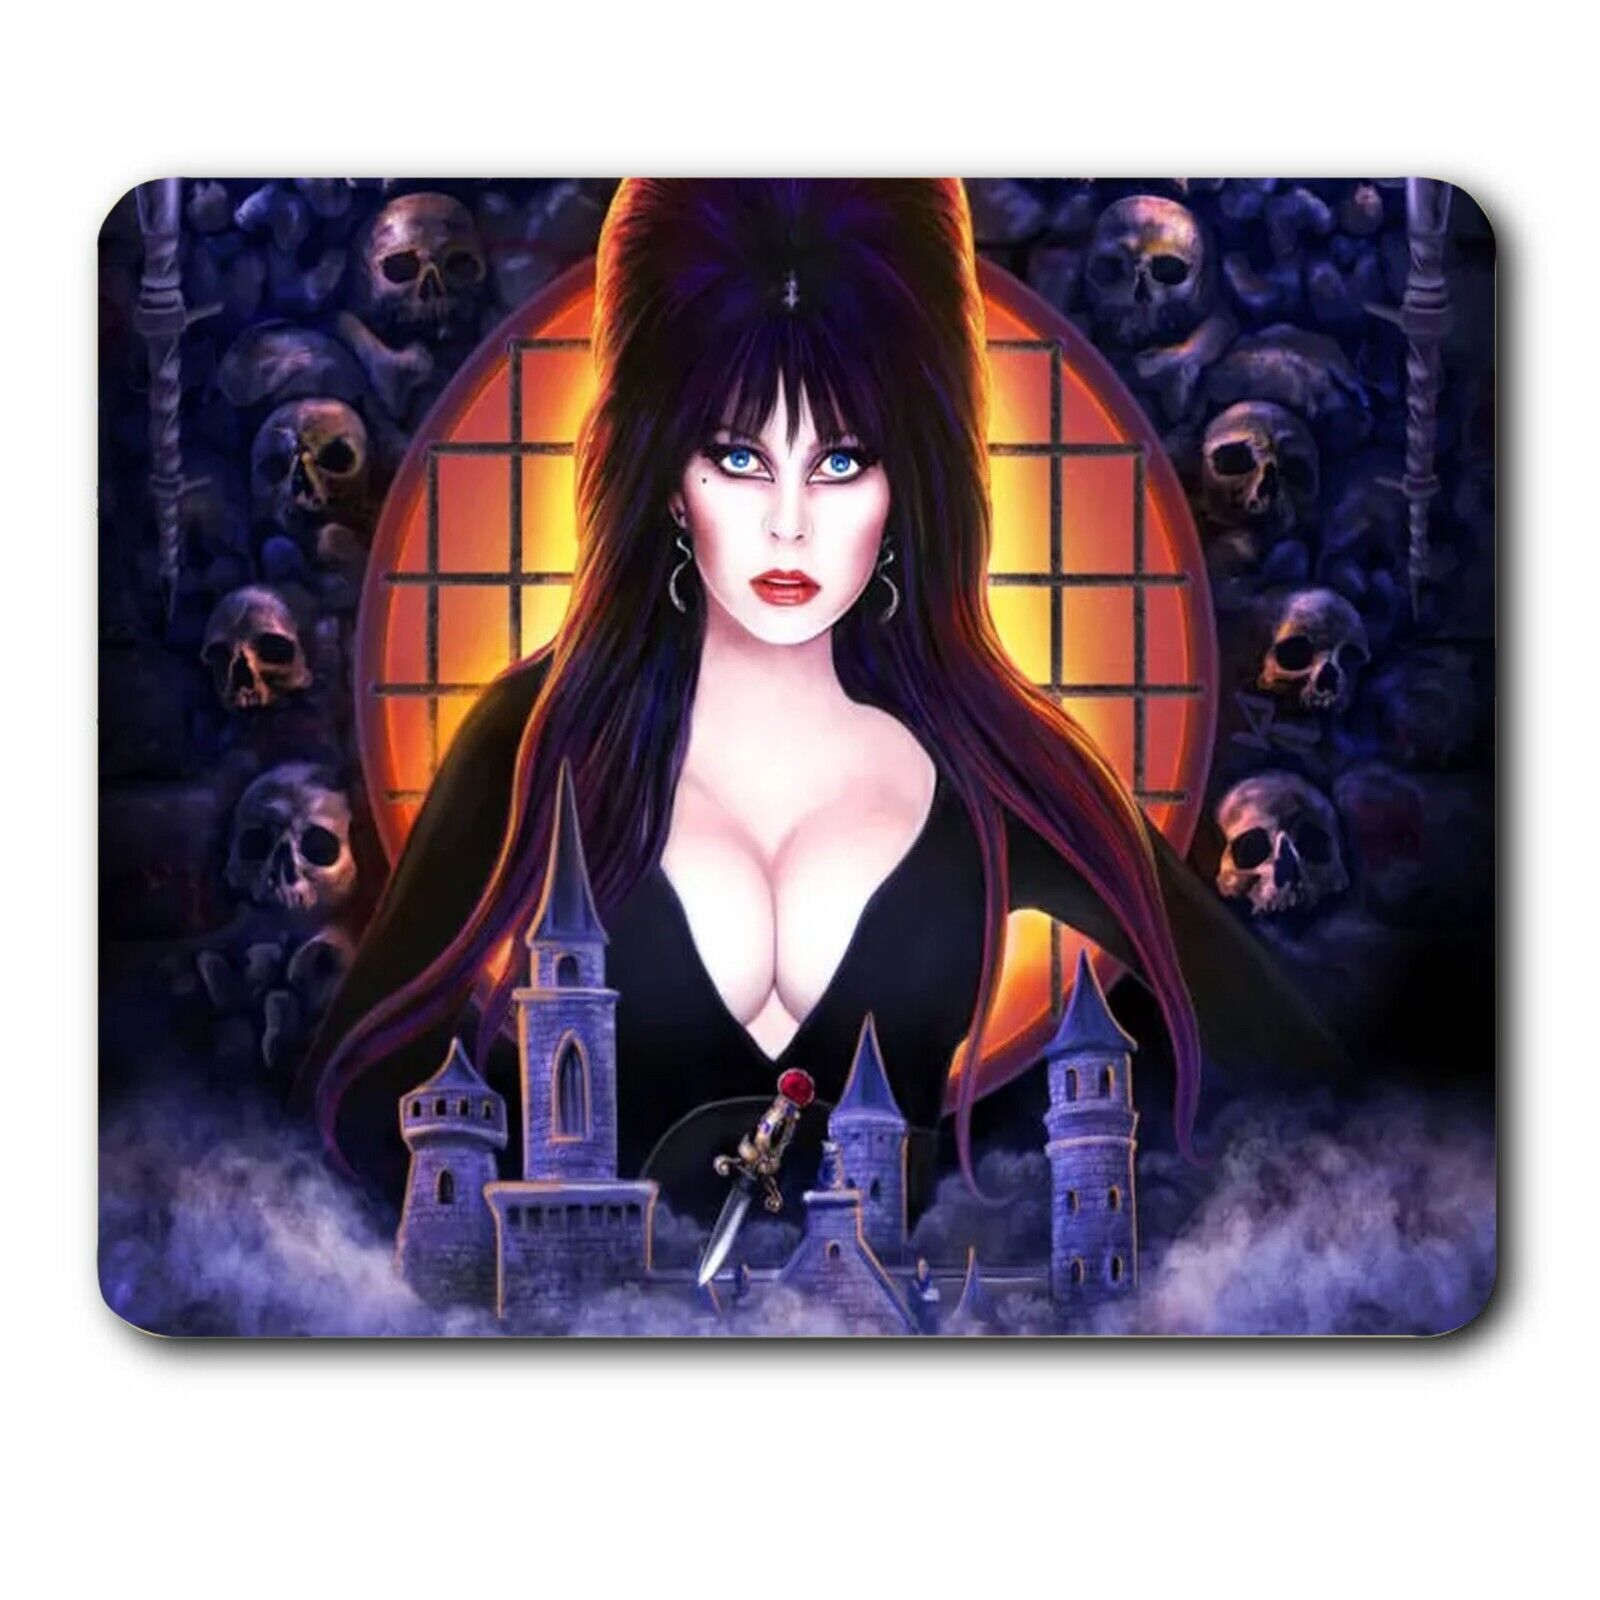 Elvira Mistress Of The Dark Cover New Computer Mouse Pad L18 Mousepad